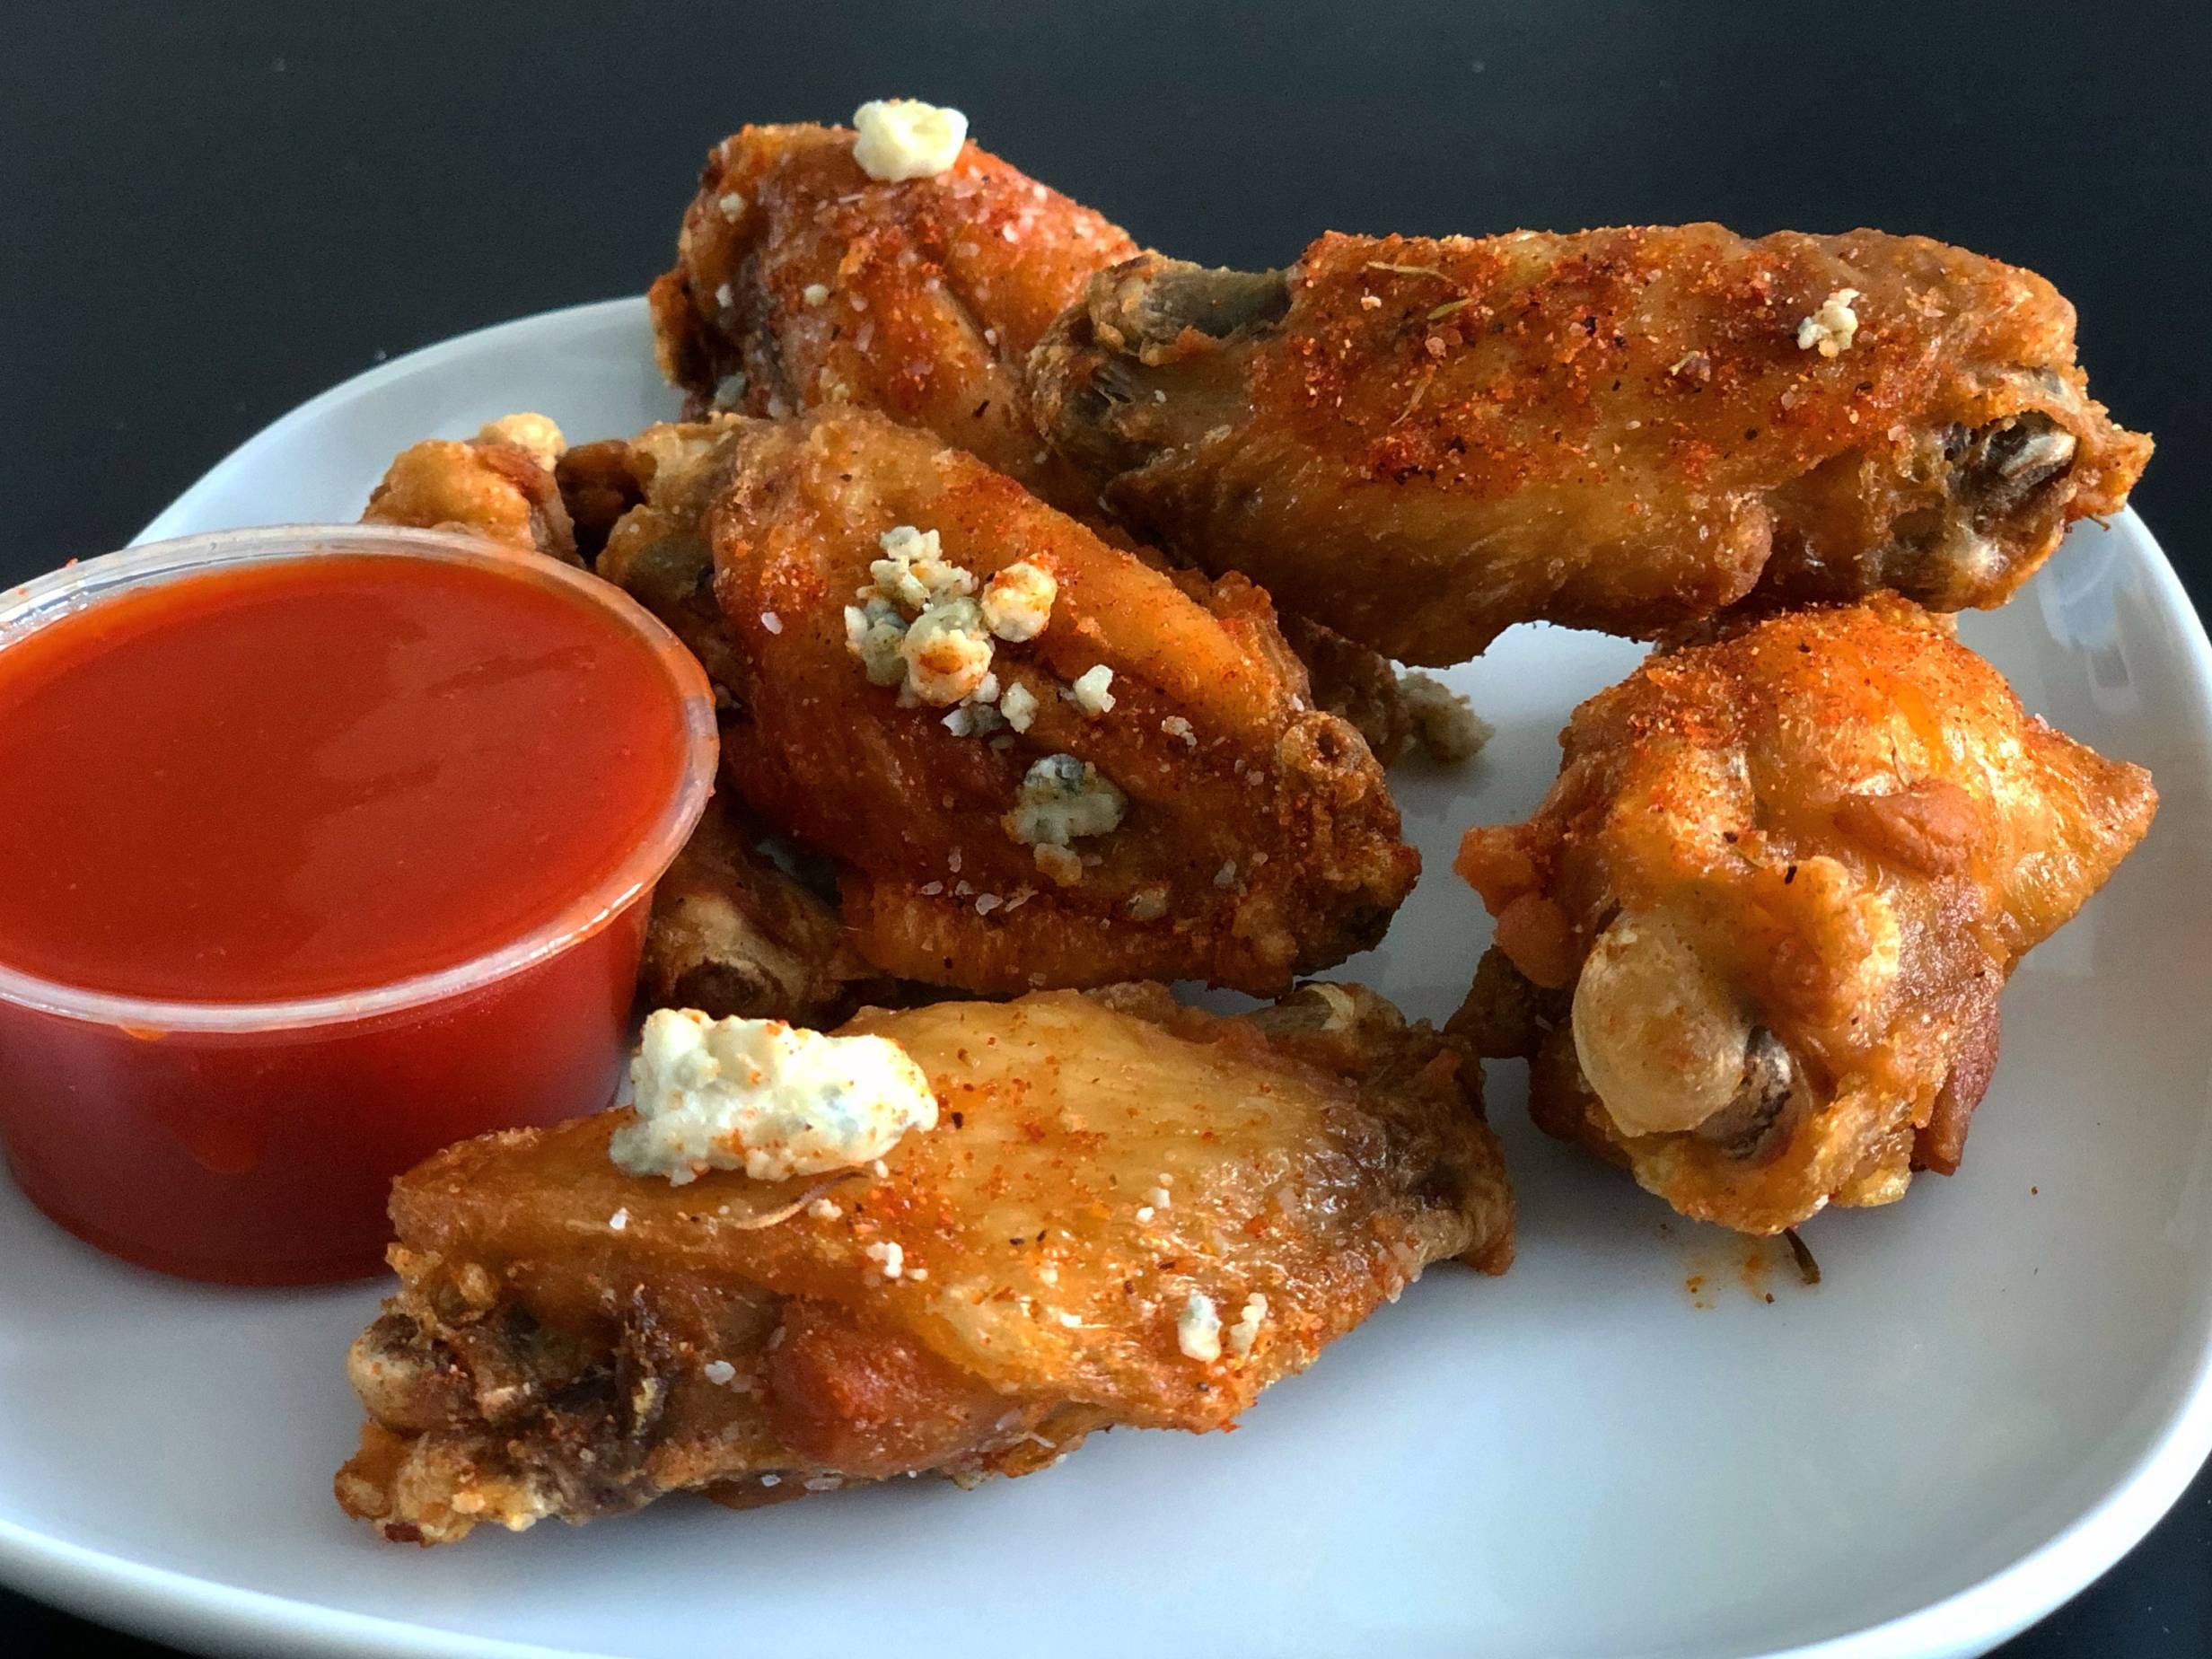 Six fried wings with blue cheese crumbles sit on a white plate with a plastic side cup of bright red dipping sauce. Photo by Alyssa Buckley.